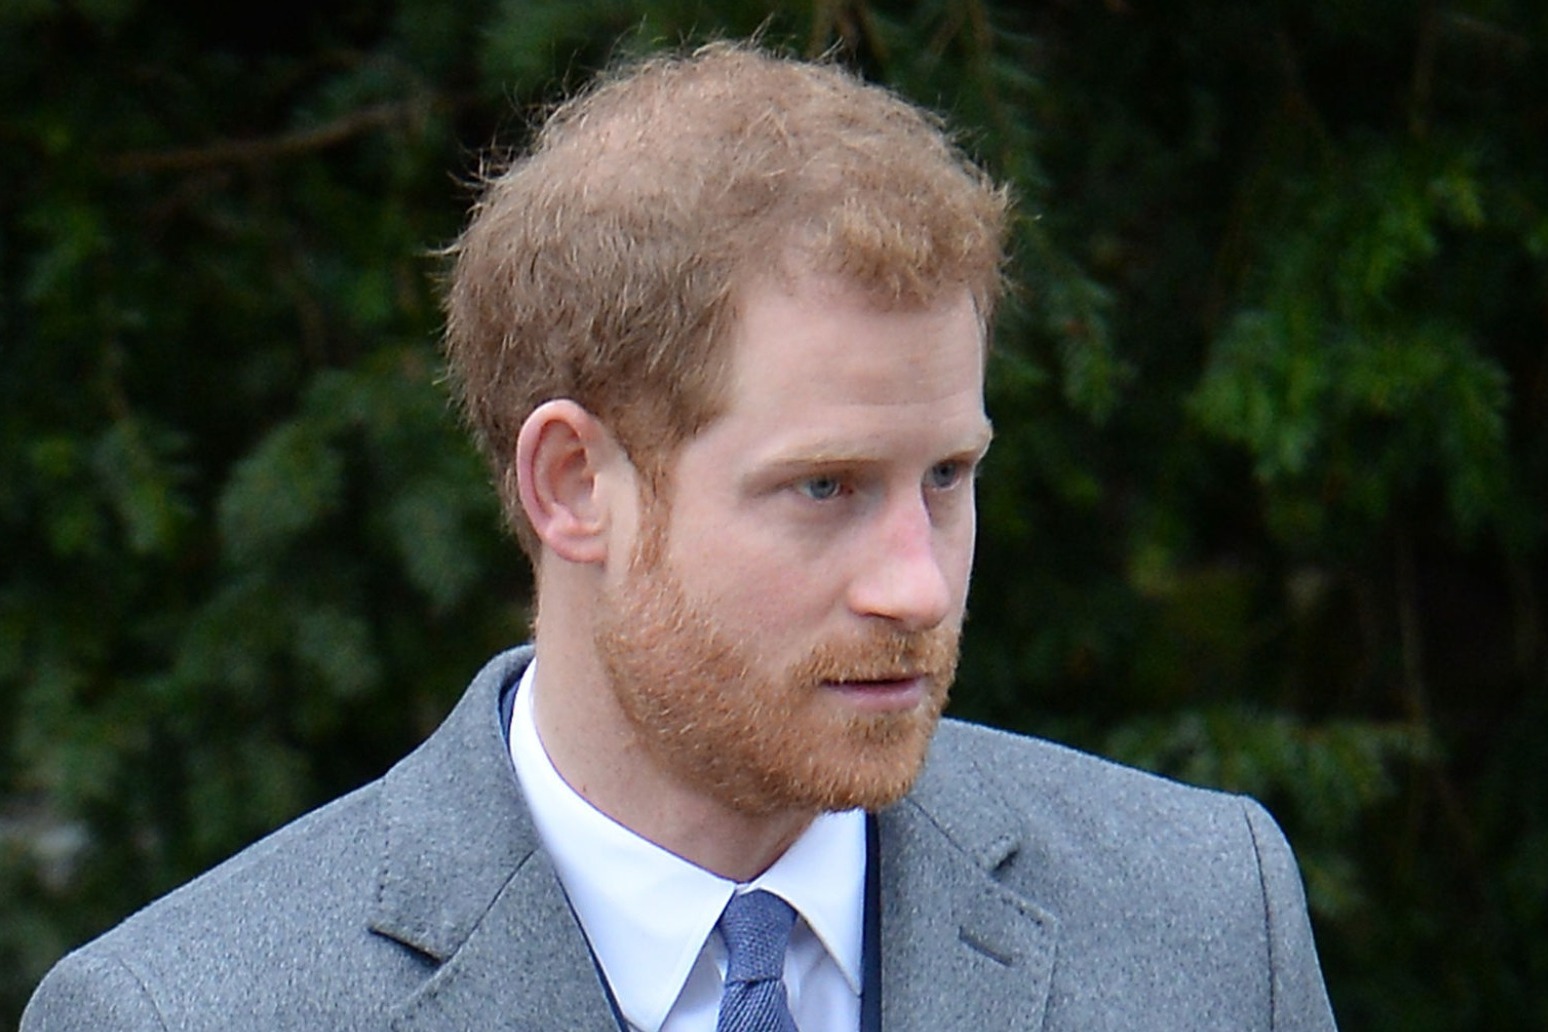 Prince Harry claims his brother William physically attacked him in leaked extract of book 